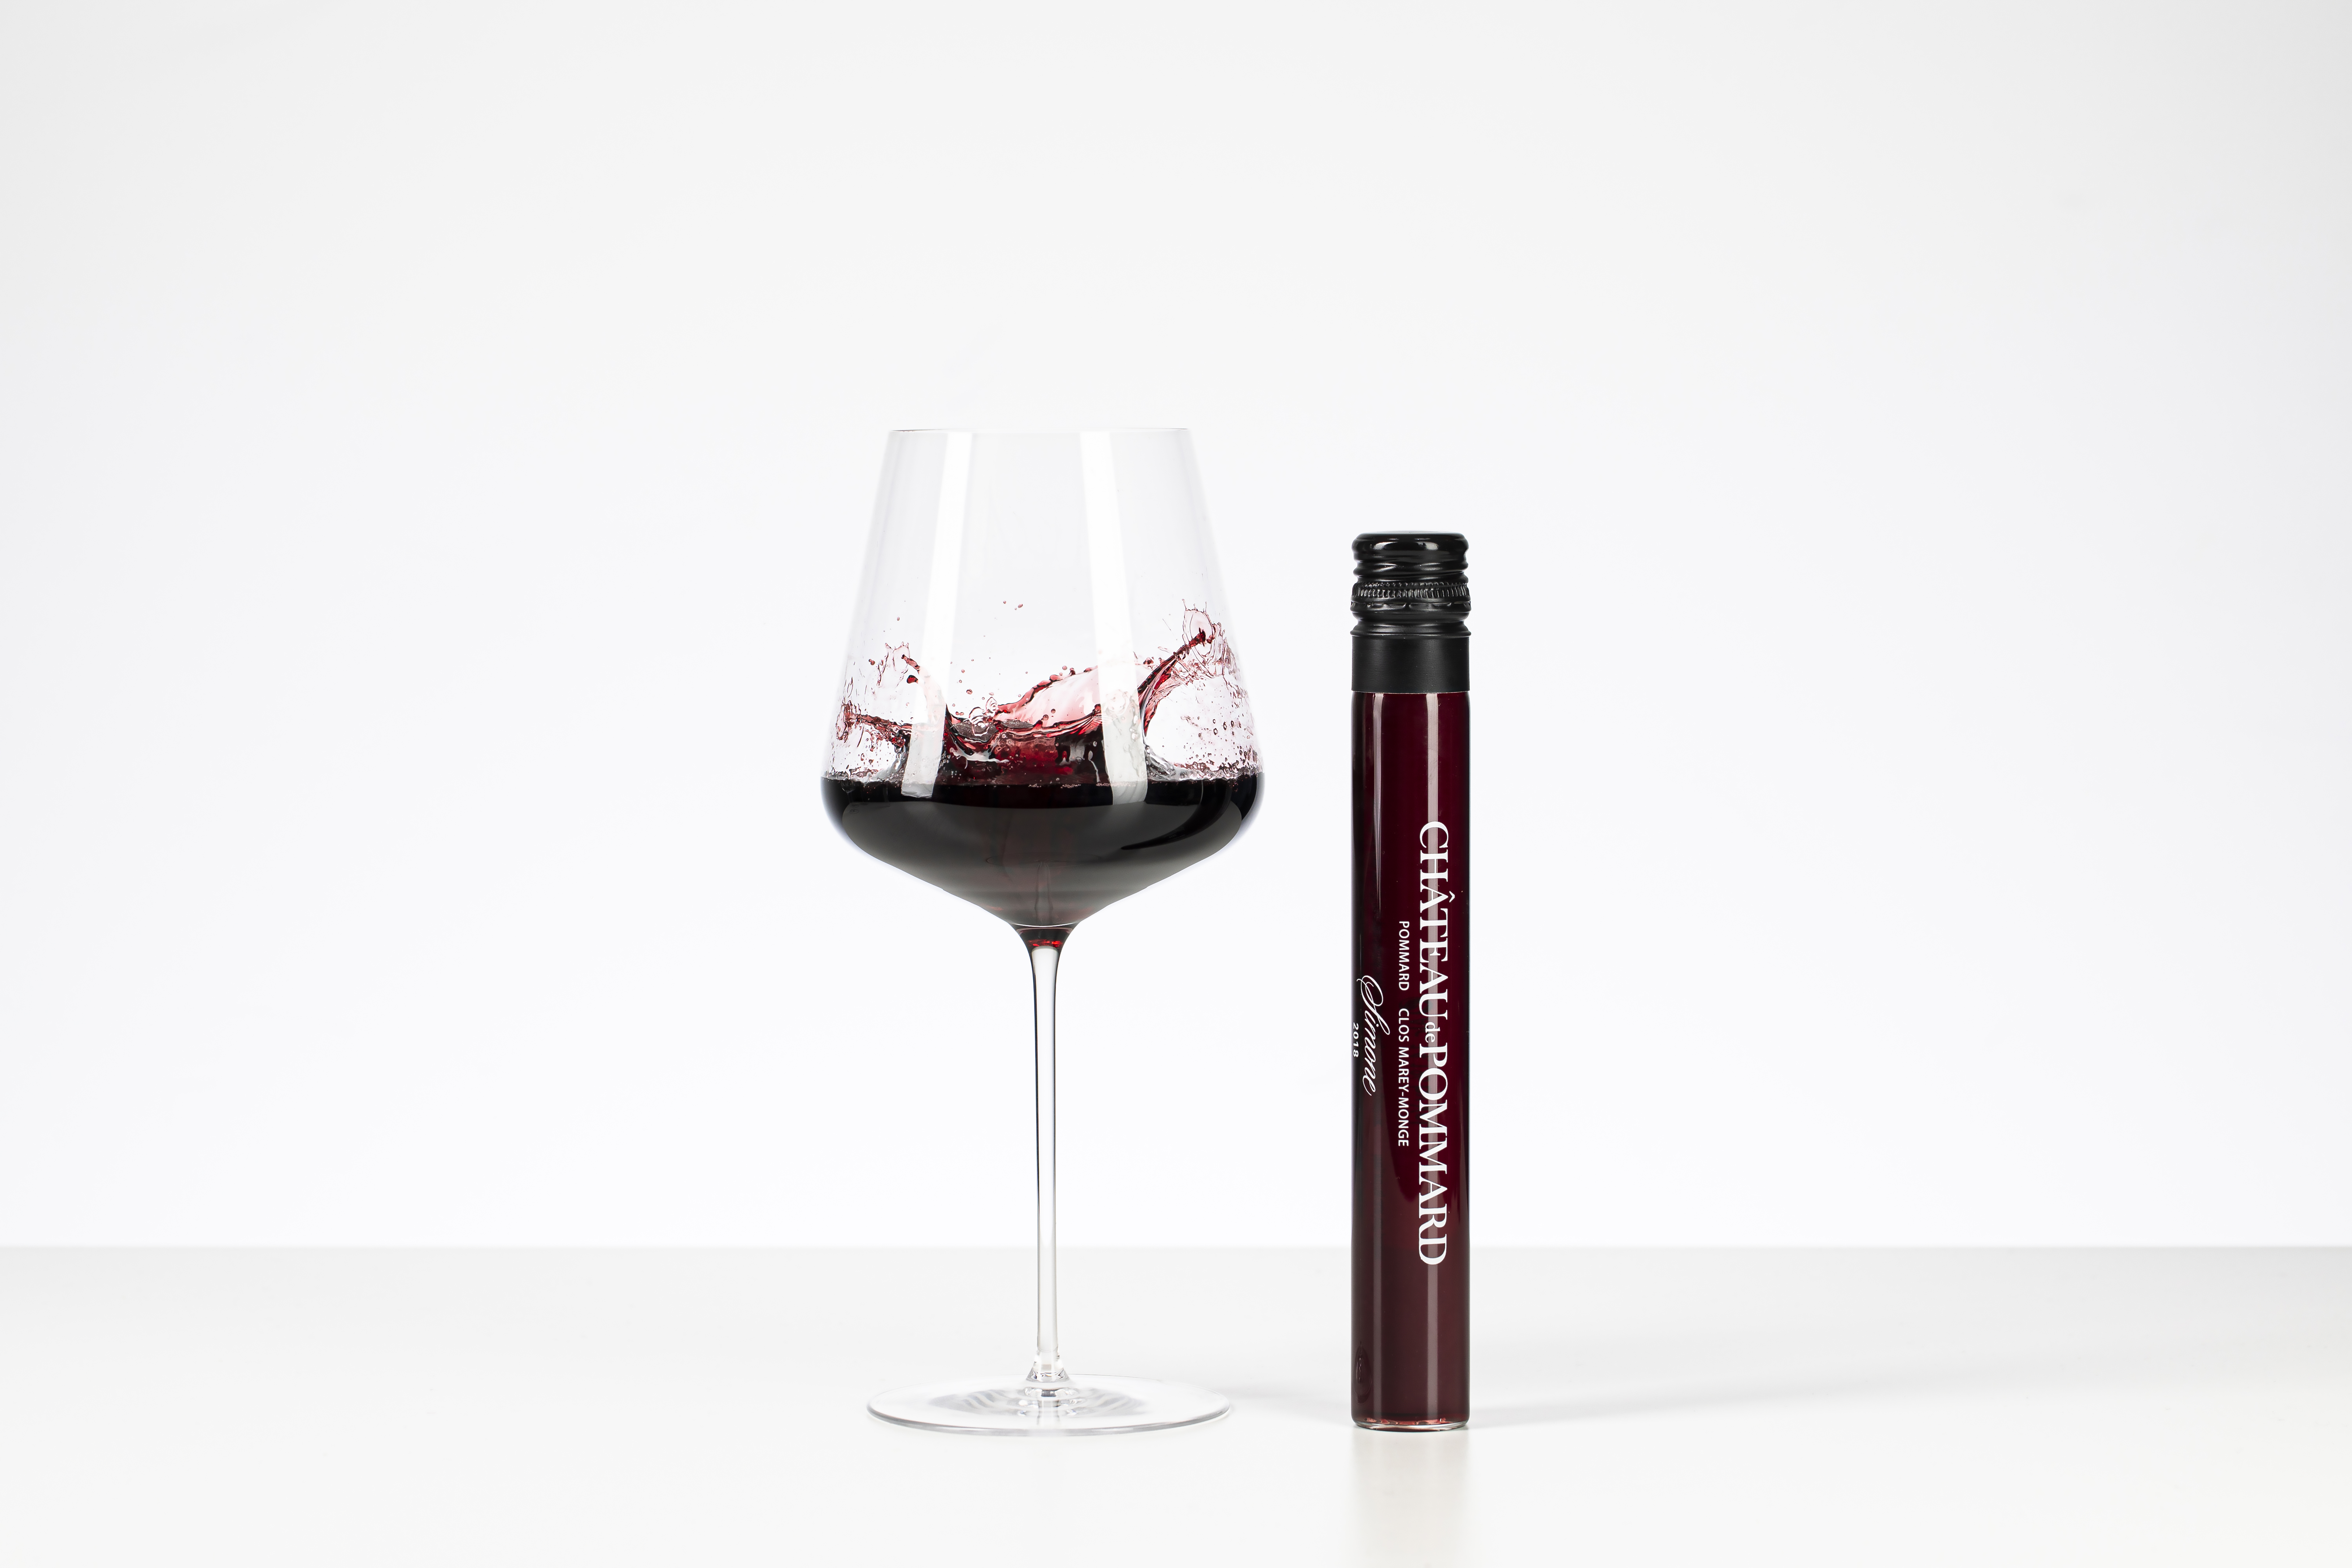 Chateau-de-Pommard-in-TUBES-©-TUBES-Wines-Spirits-by-the-Glass